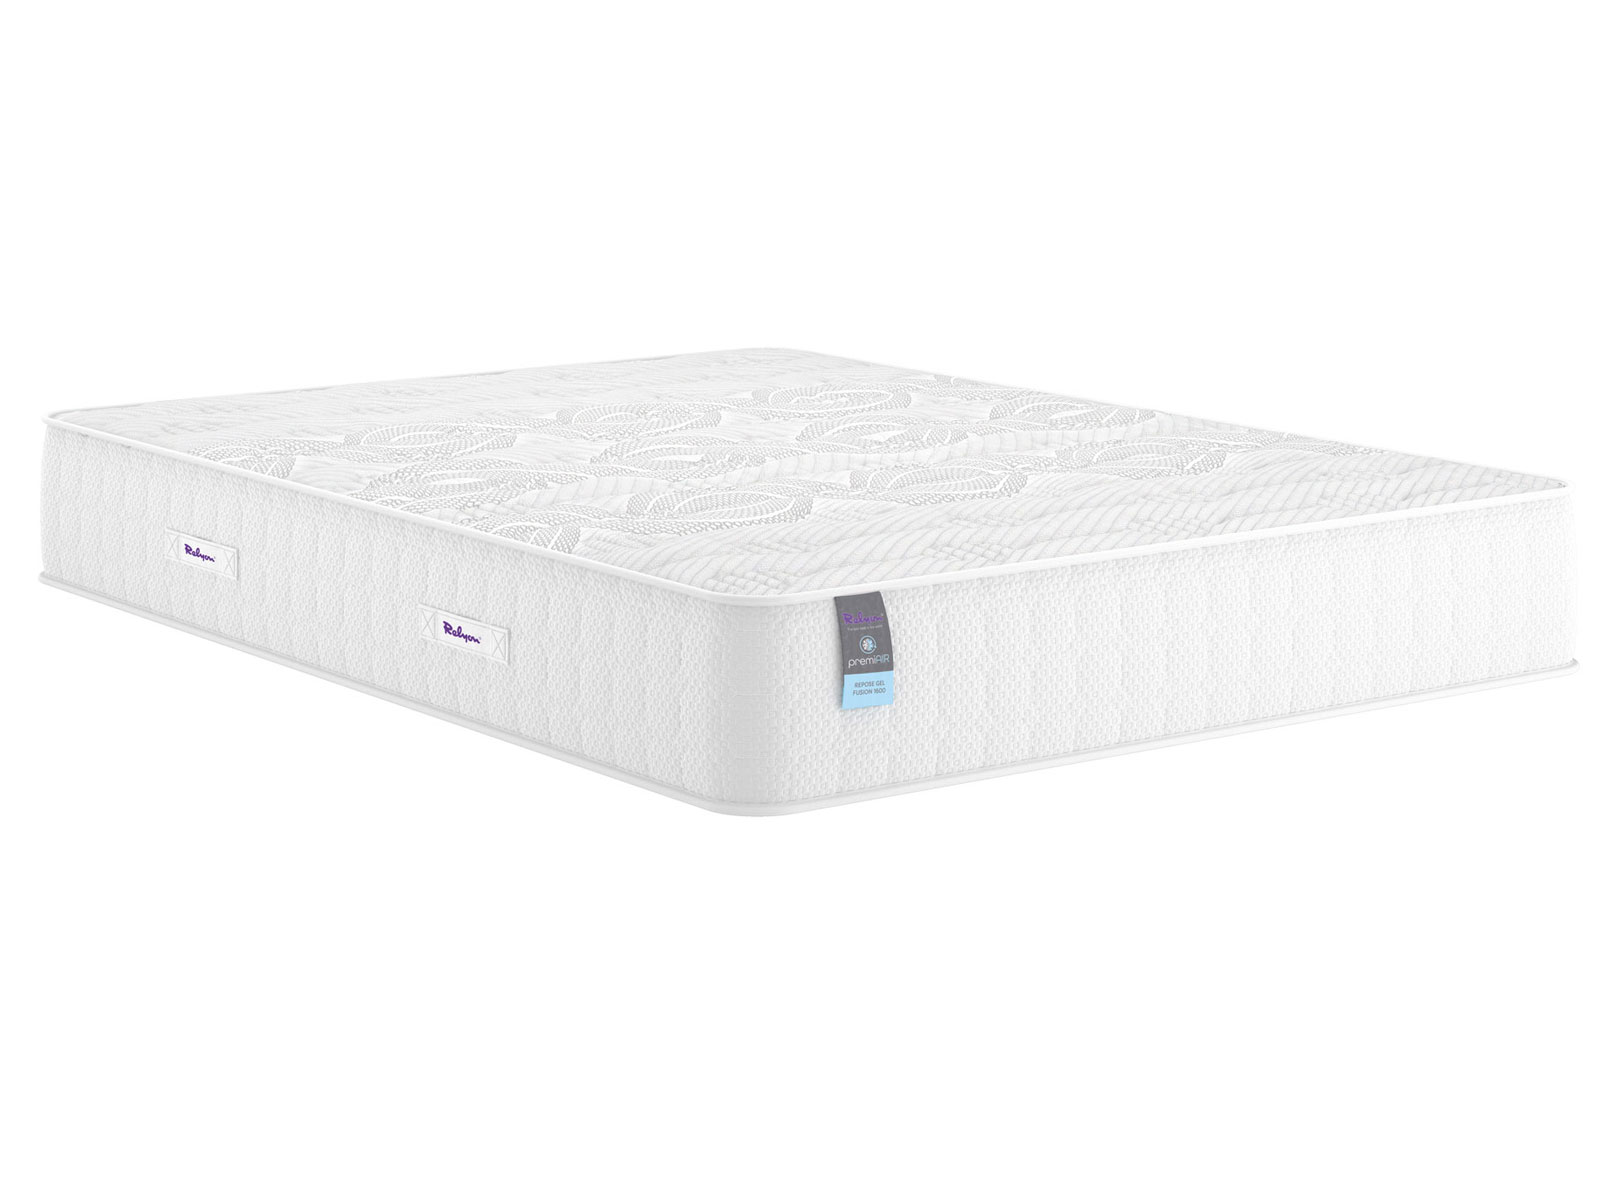 4ft6 Double Relyon Contemporary Gel Fusion 1600 Mattress